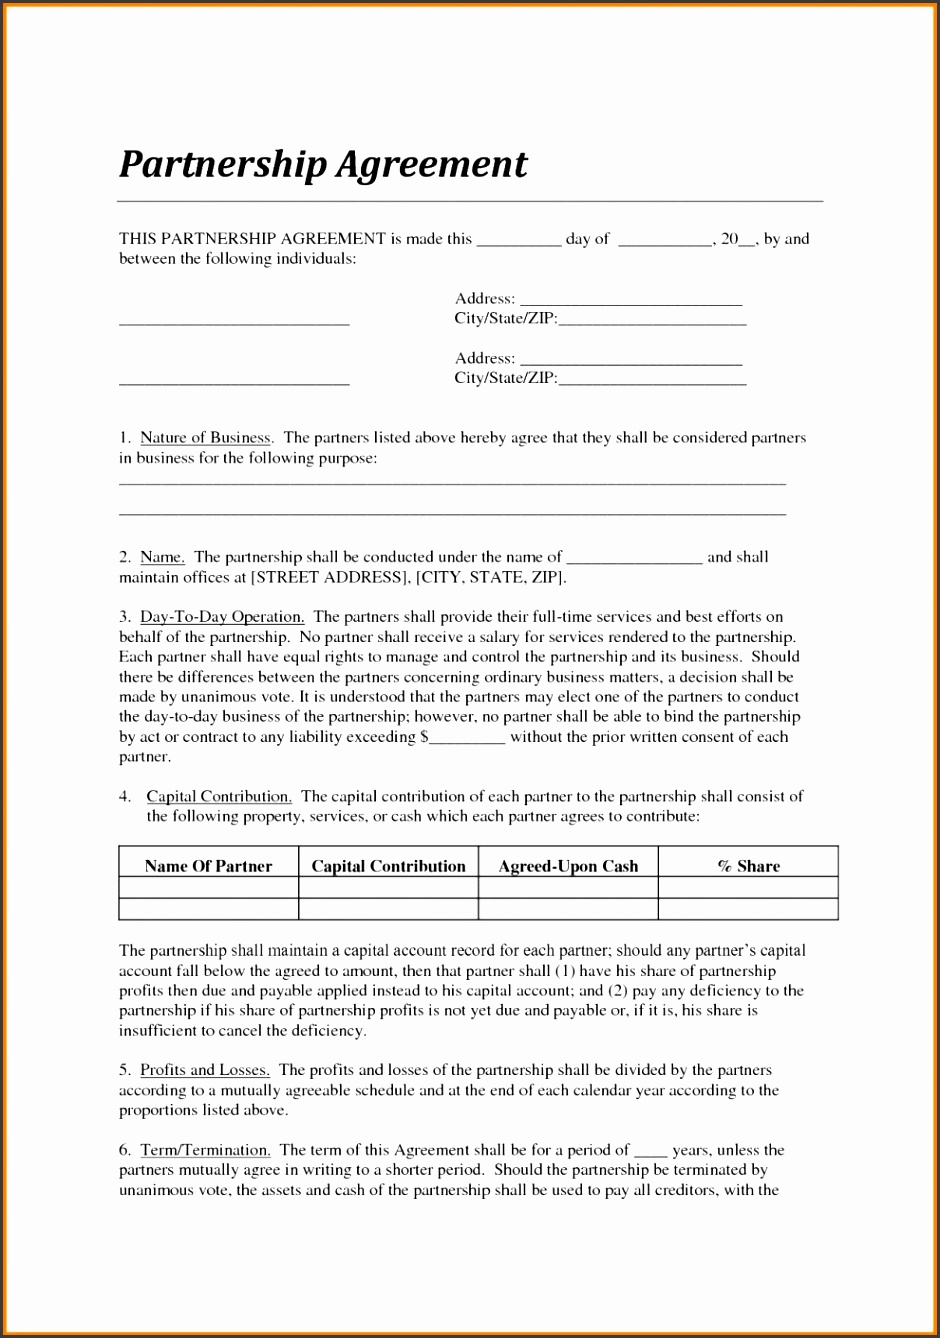 Sale Business Agreement Sample Loan Managed Service Contract Template With Unsecured Gym